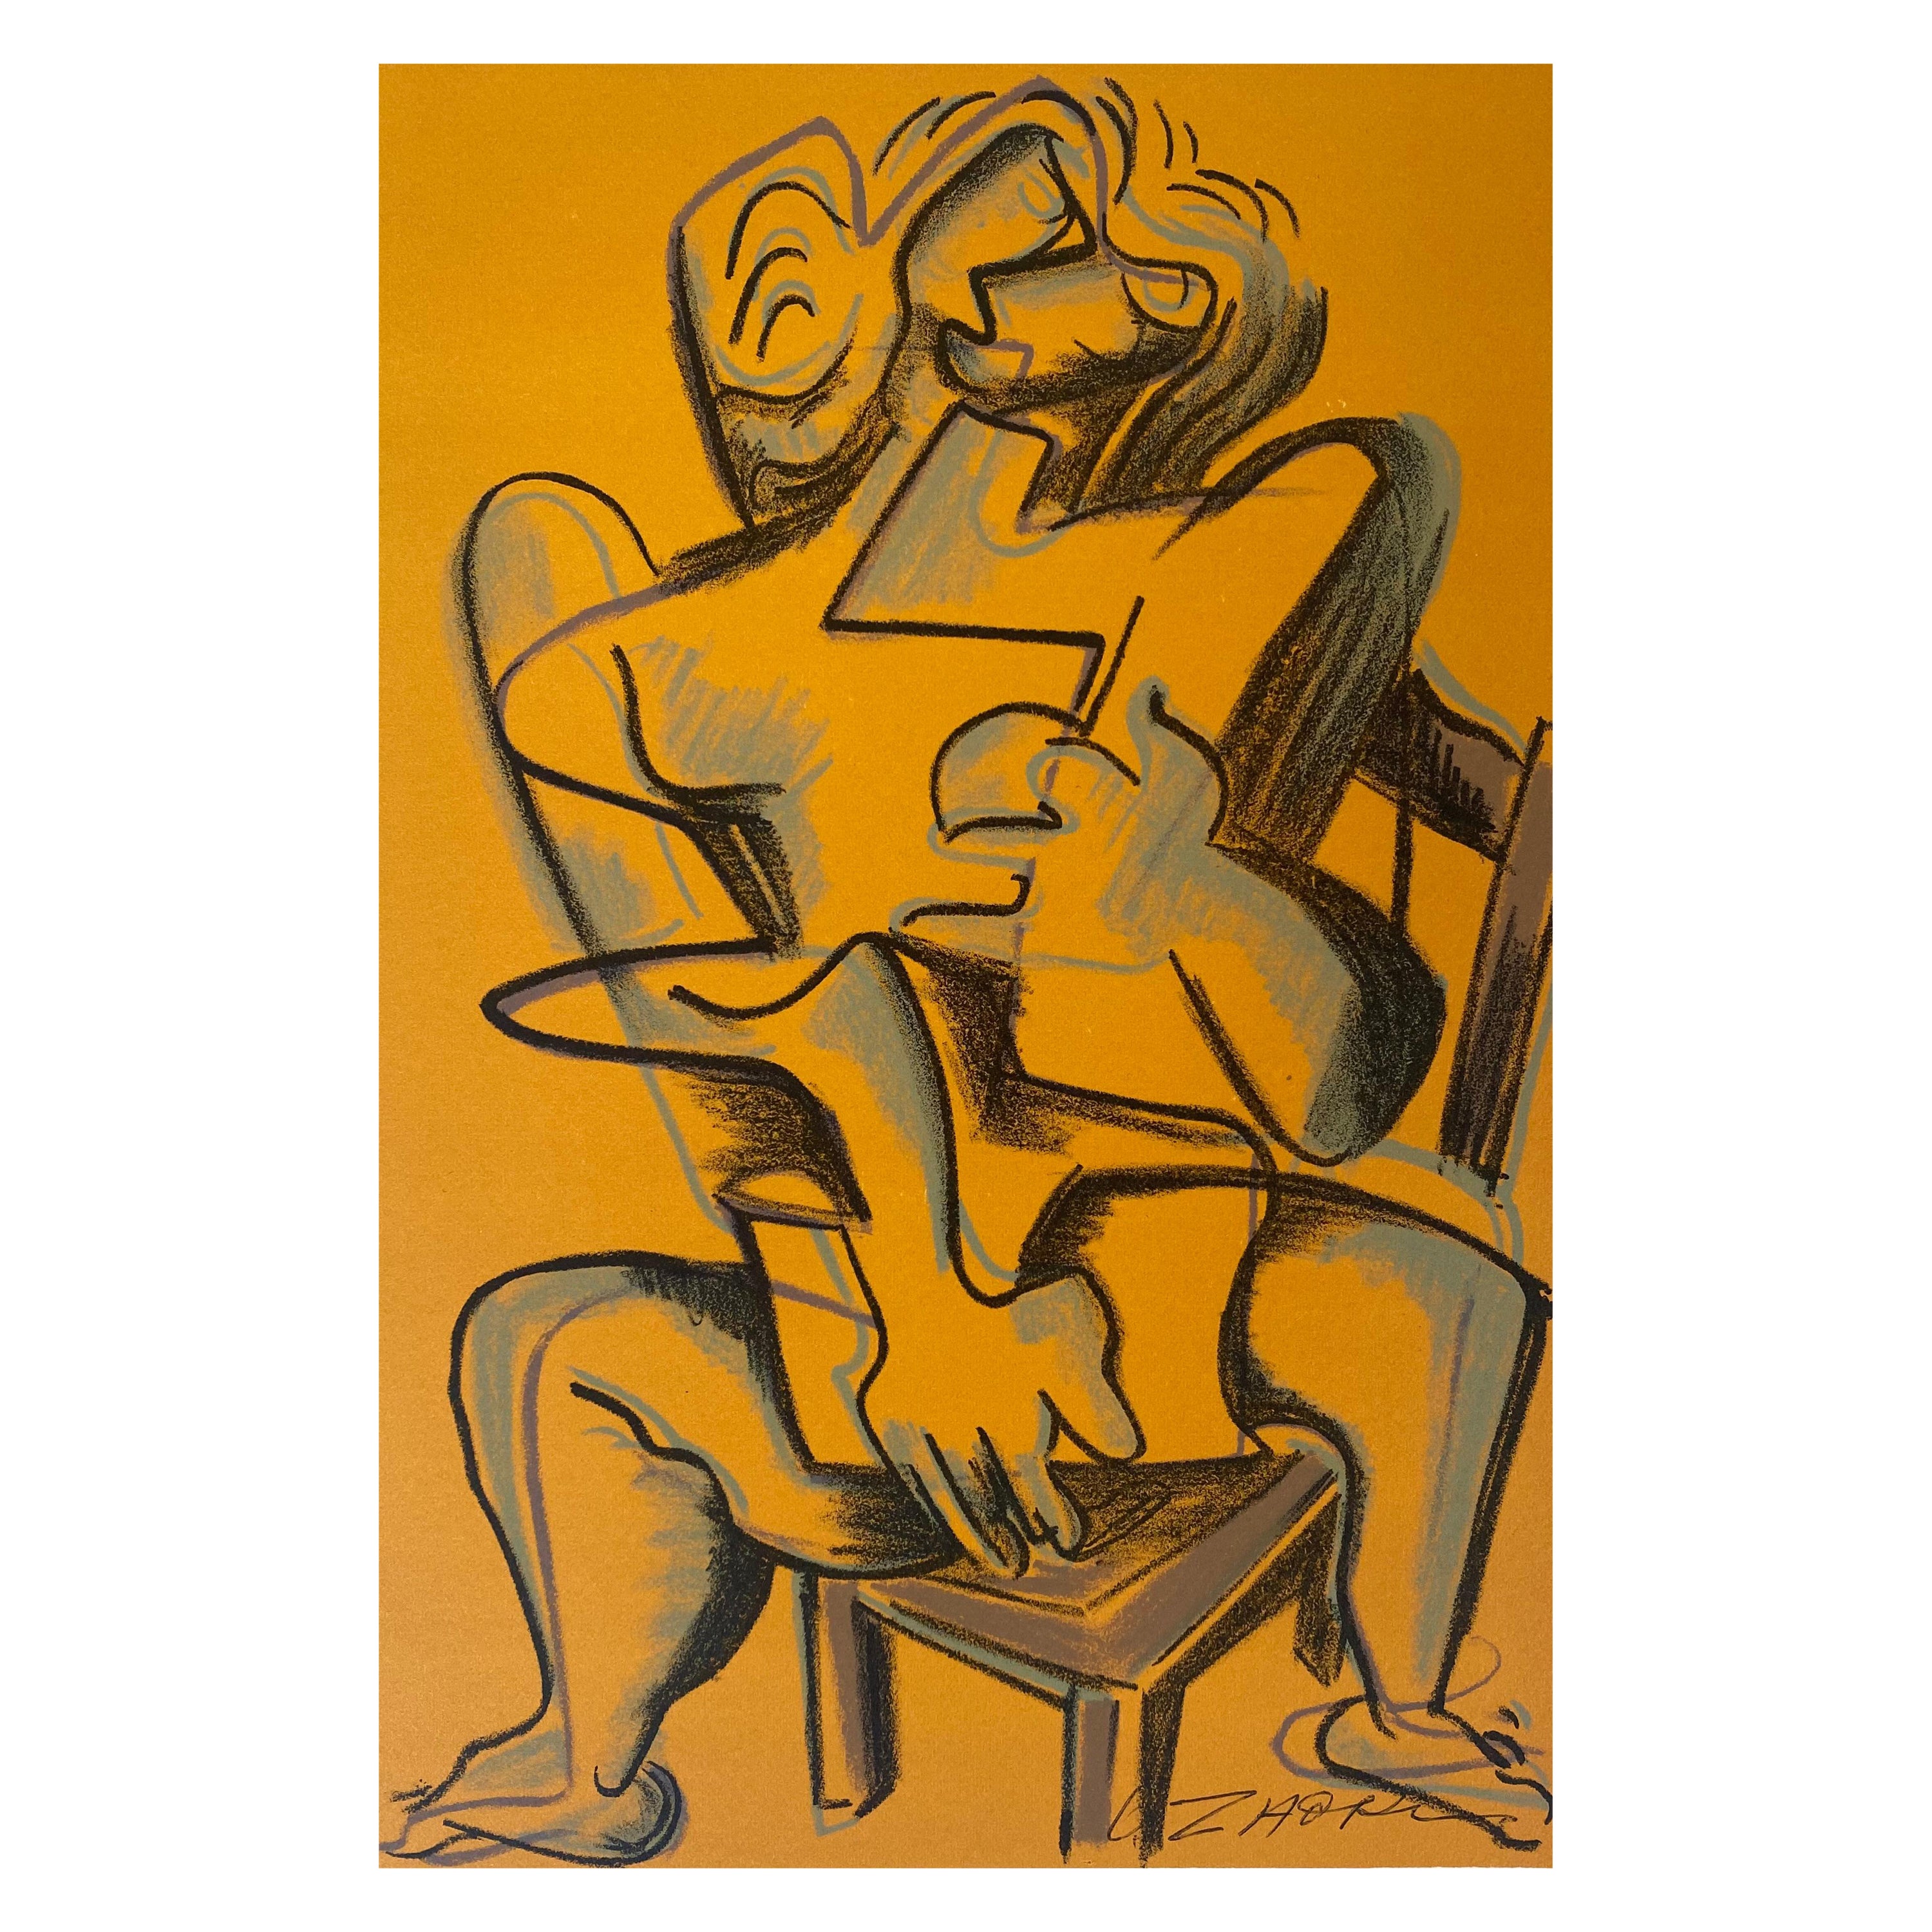 Lithography "The works of Hercules", Yellow, Zadkine For Sale